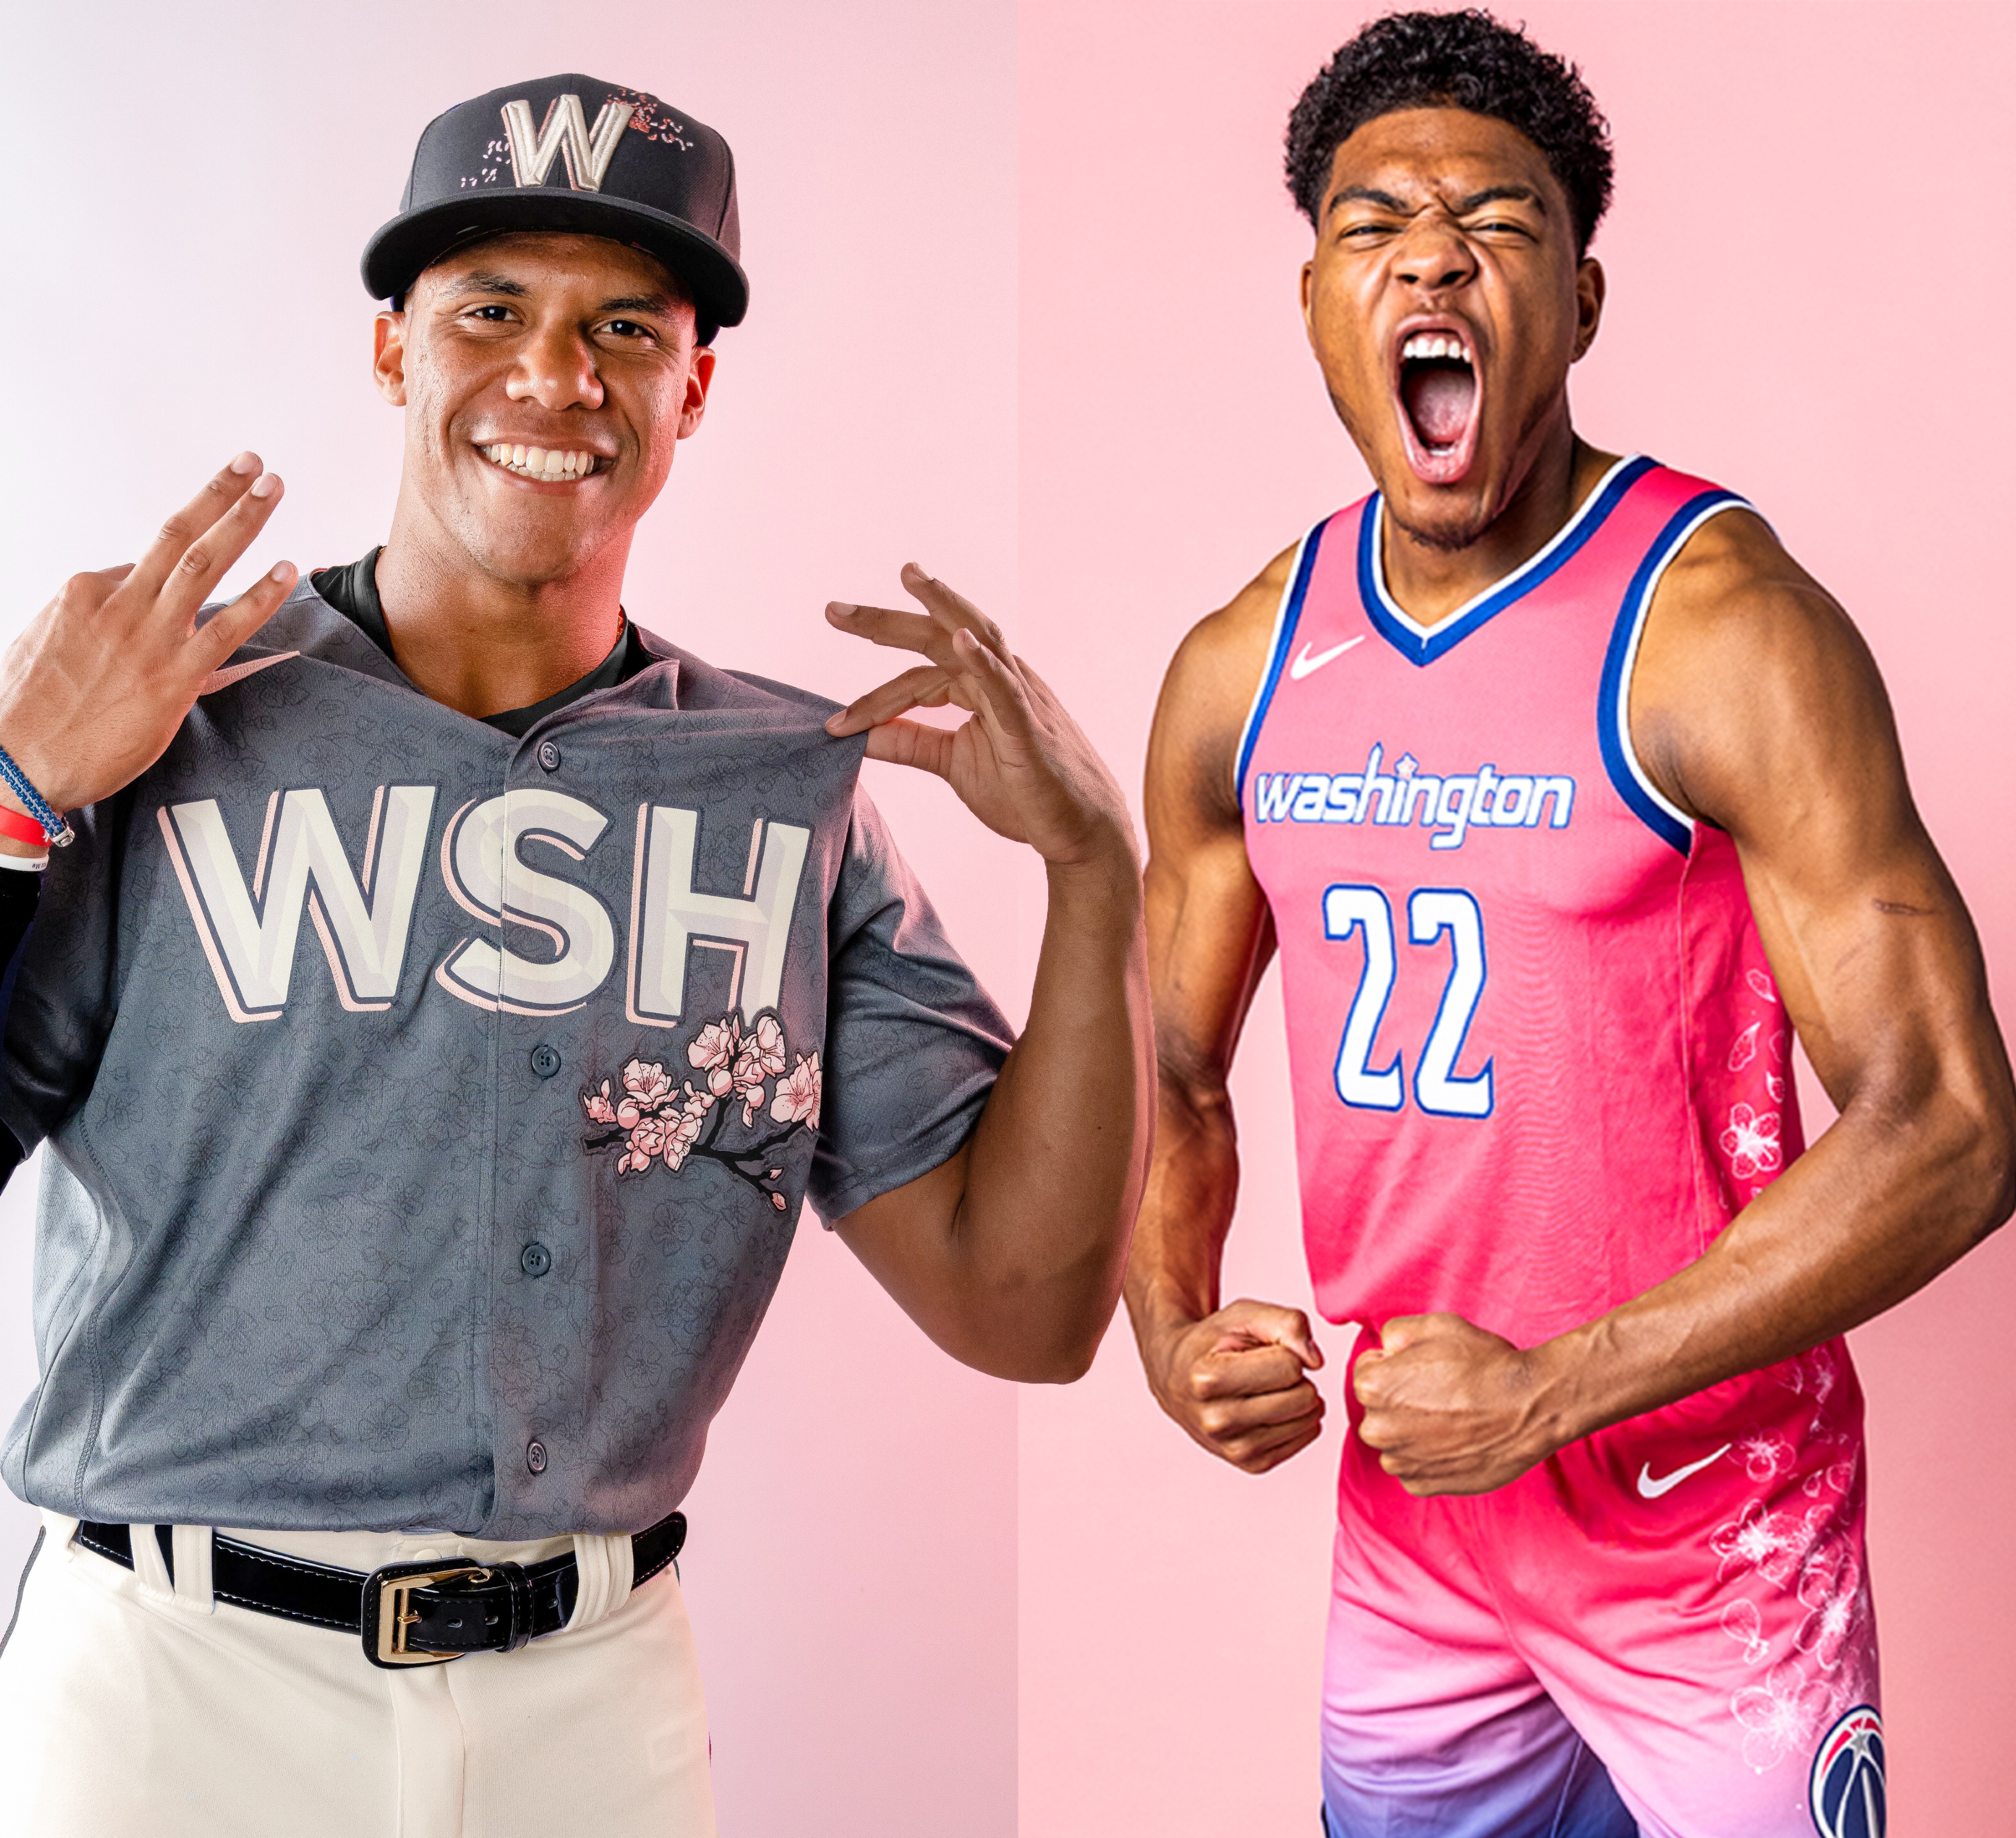 Front Office Sports on X: The Washington Nationals and Wizards have each  unveiled cherry blossom jerseys, paying homage to DC's famous flowers 🌸  The Nike collaboration is the first uniform campaign between